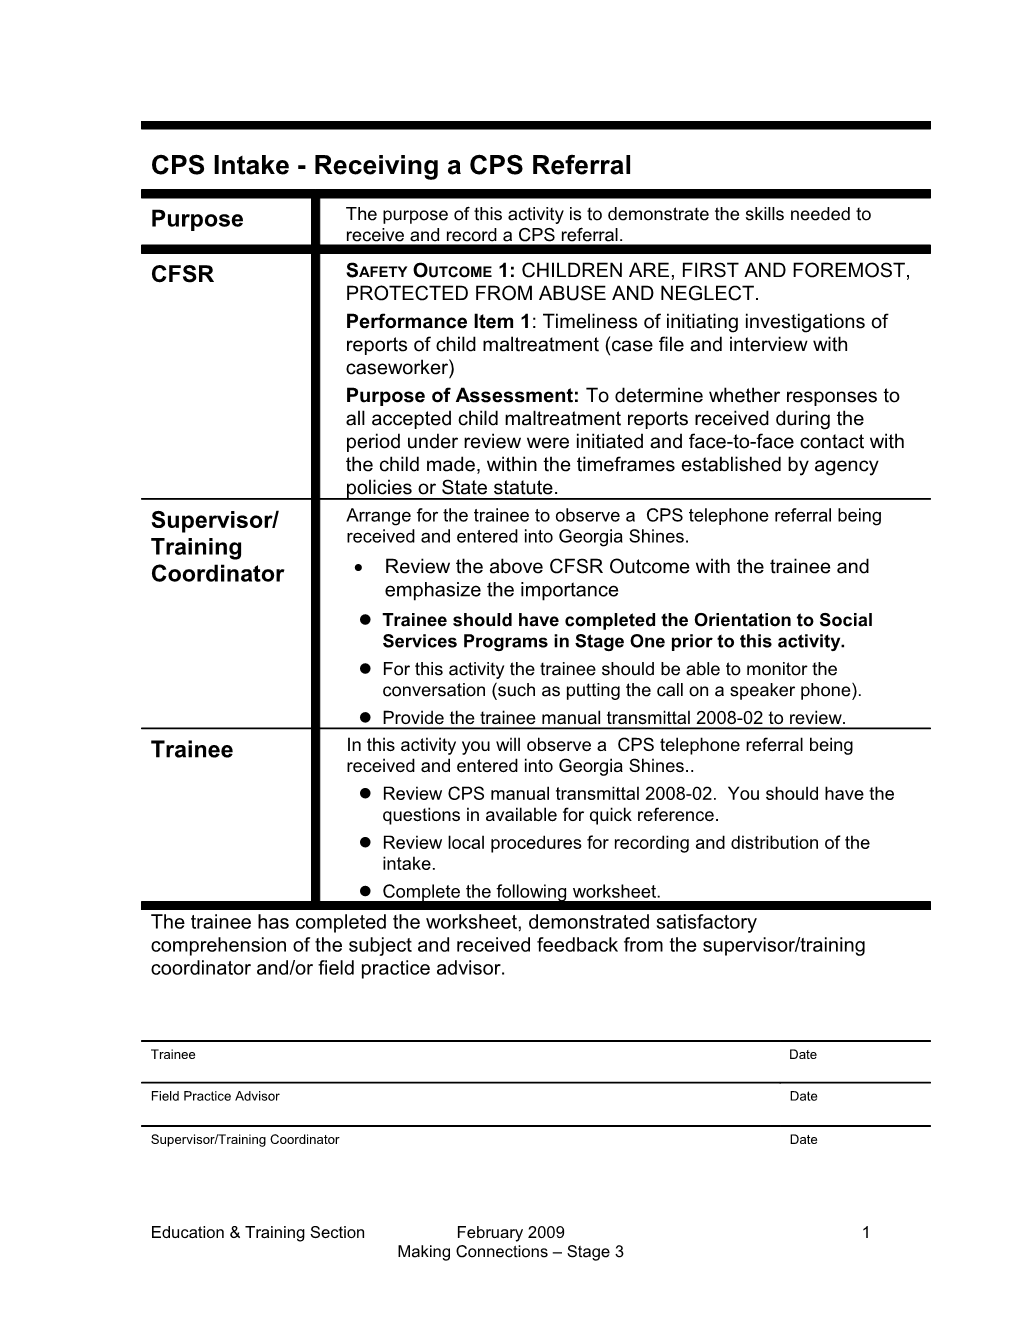 CPS Intake - Receiving a CPS Referral